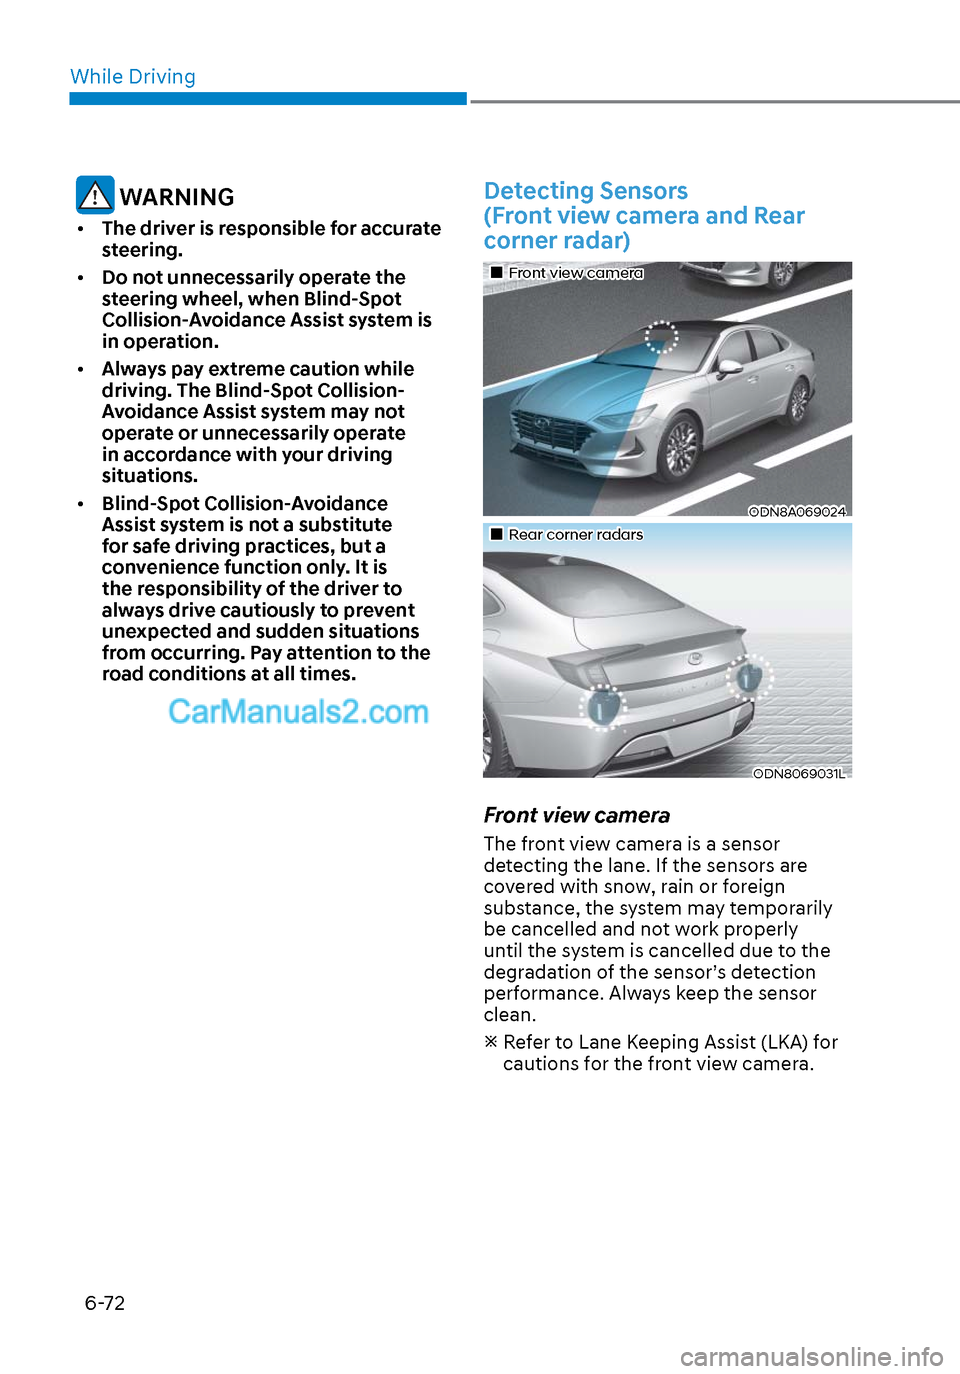 Hyundai Sonata 2020 Service Manual While Driving6-72
 WARNING
•  The driver is responsible for accurate 
steering.
•  Do not unnecessarily operate the 
steering wheel, when Blind-Spot 
Collision-Avoidance Assist system is 
in opera